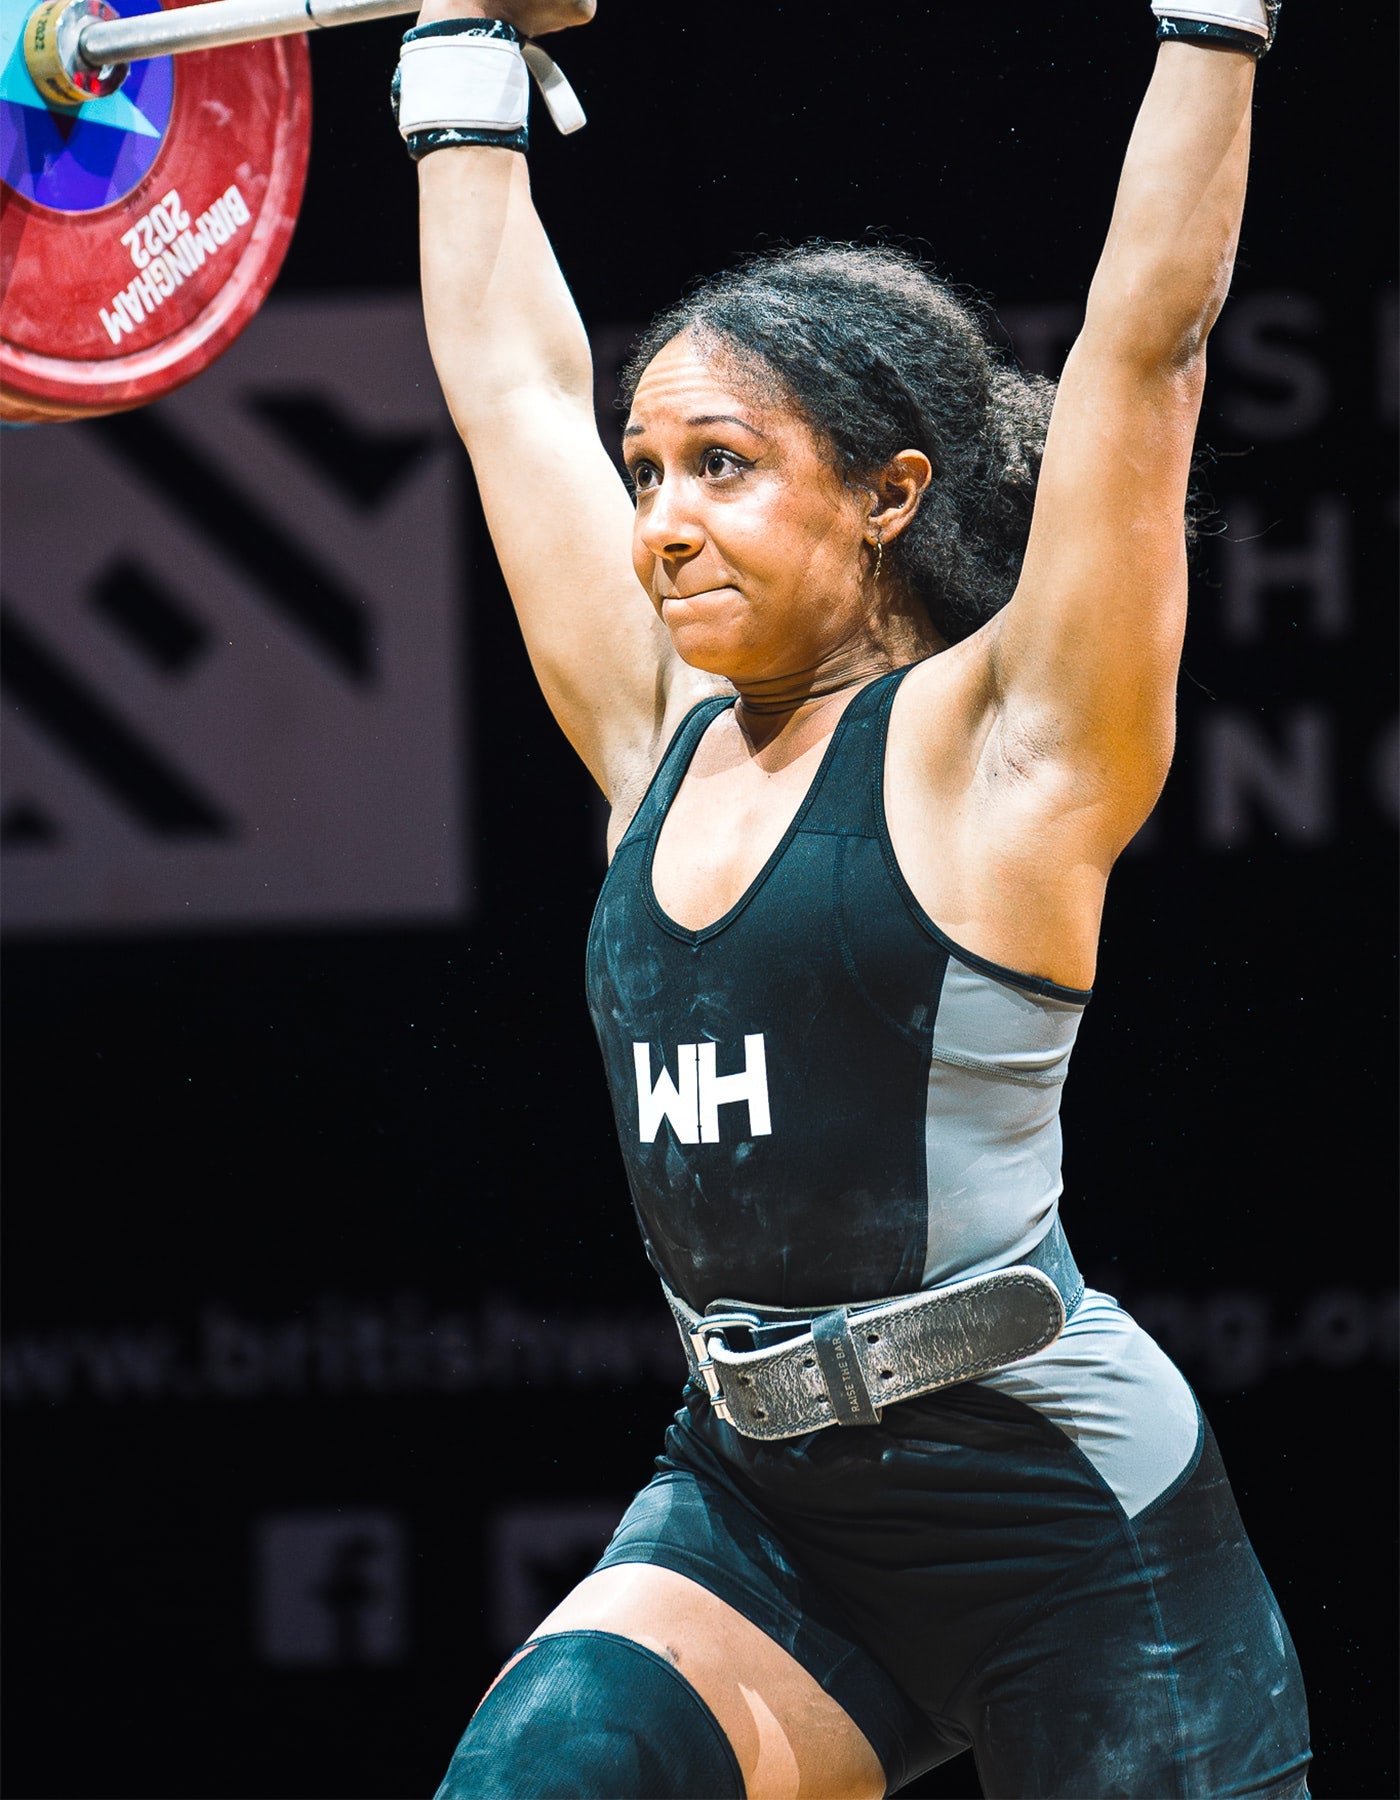 Zoe Smith wearing WH singlet in competition, recovering from jerk